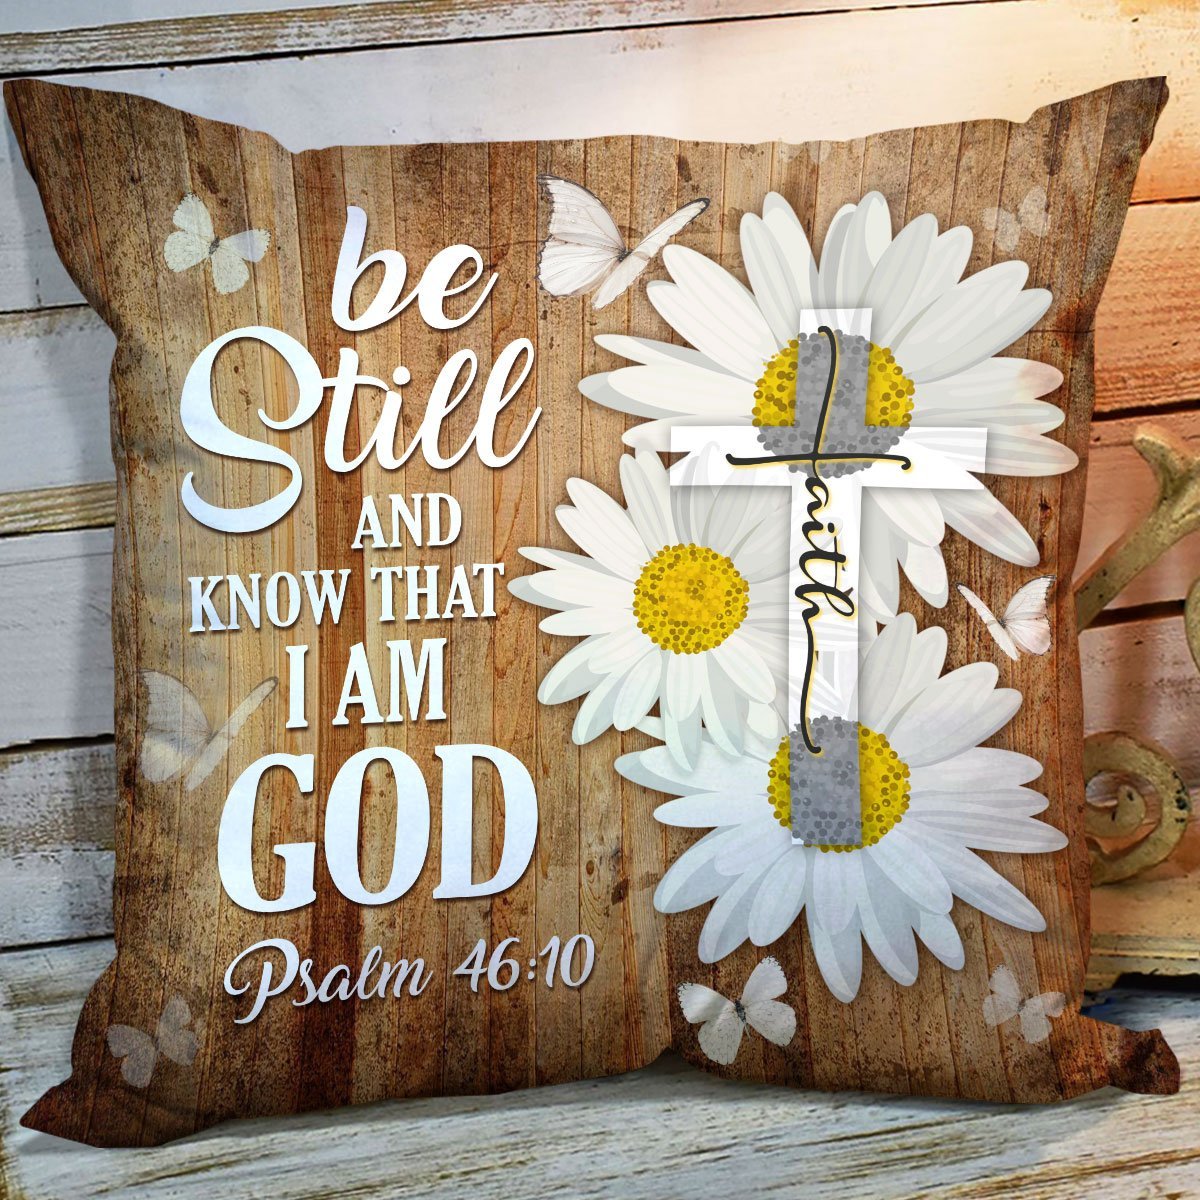 Bible Verse Pillow - Scripture Pillow - God Pillow -  Special Throw Pillow - Be Still And Know That I Am God